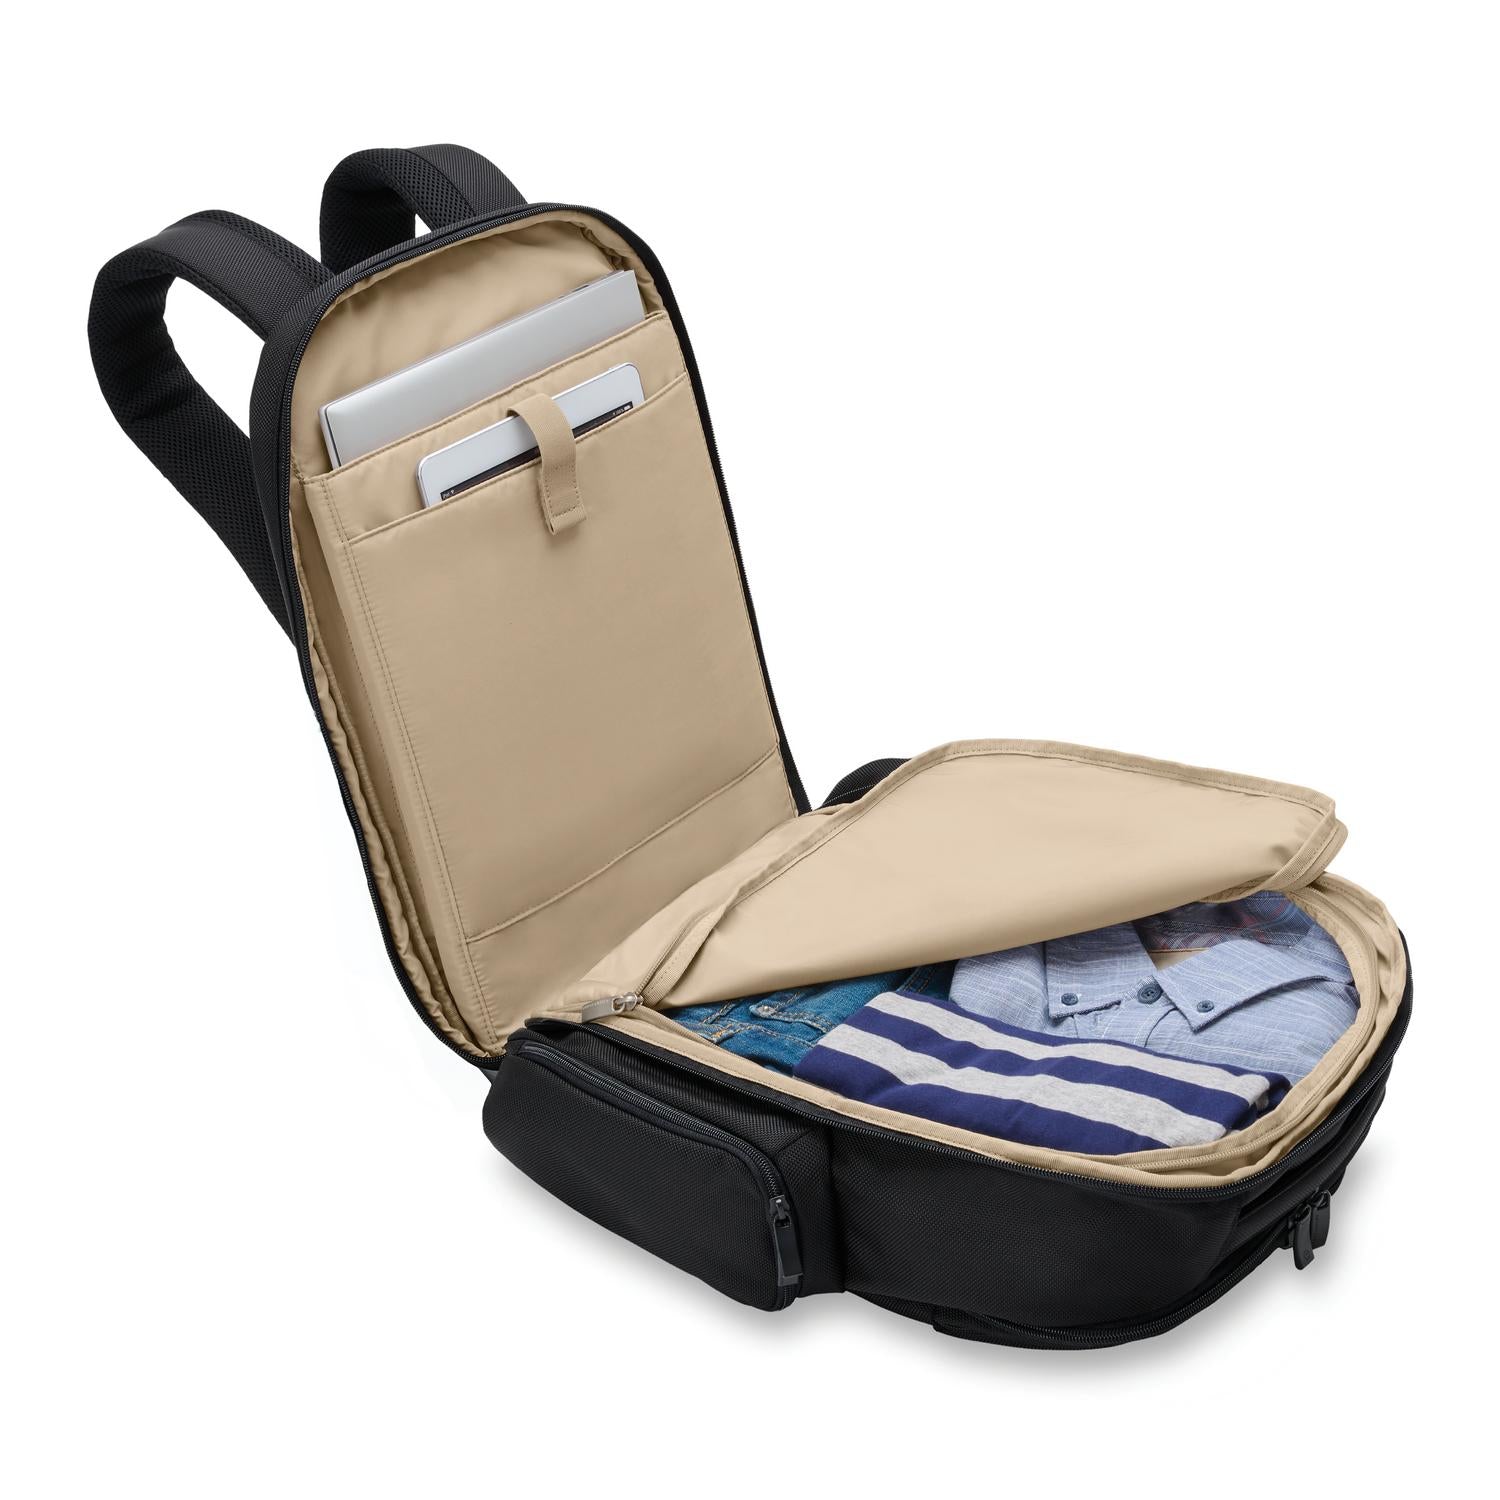 Carry-On Backpack by Baseline